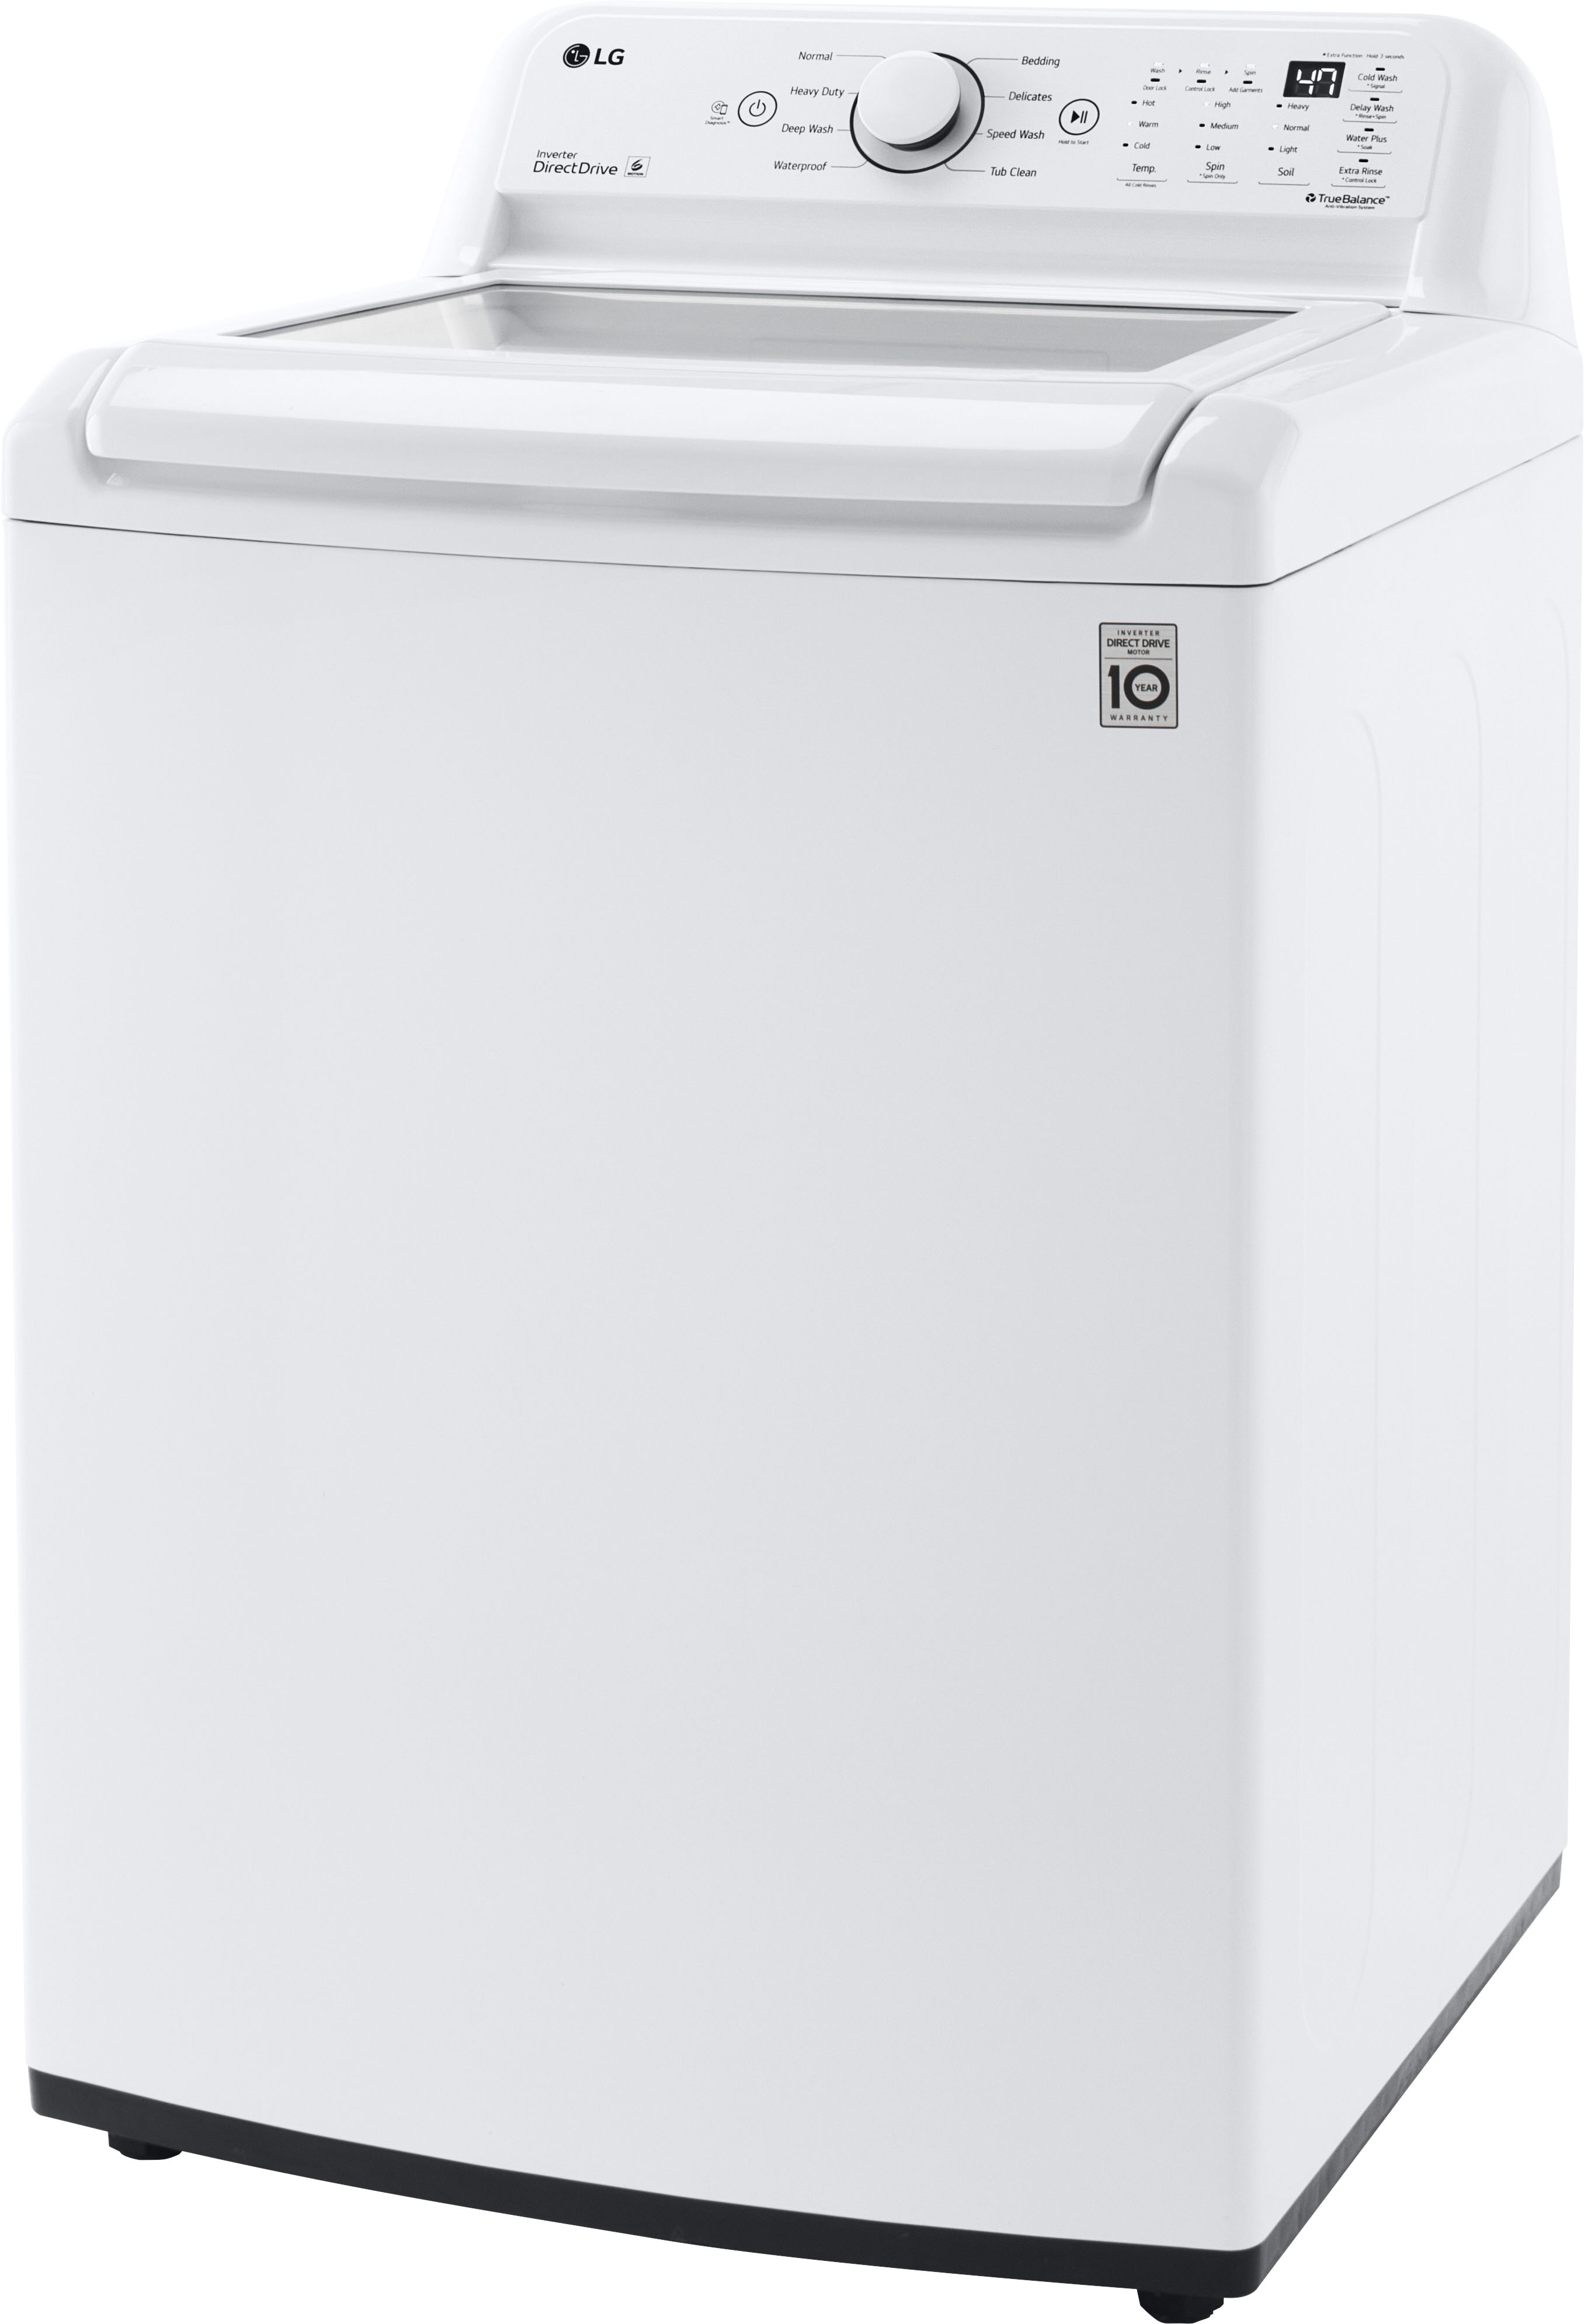 Angle View: LG - 4.5 Cu. Ft. Smart Top Load Washer with Vibration Reduction and TurboDrum Technology - White